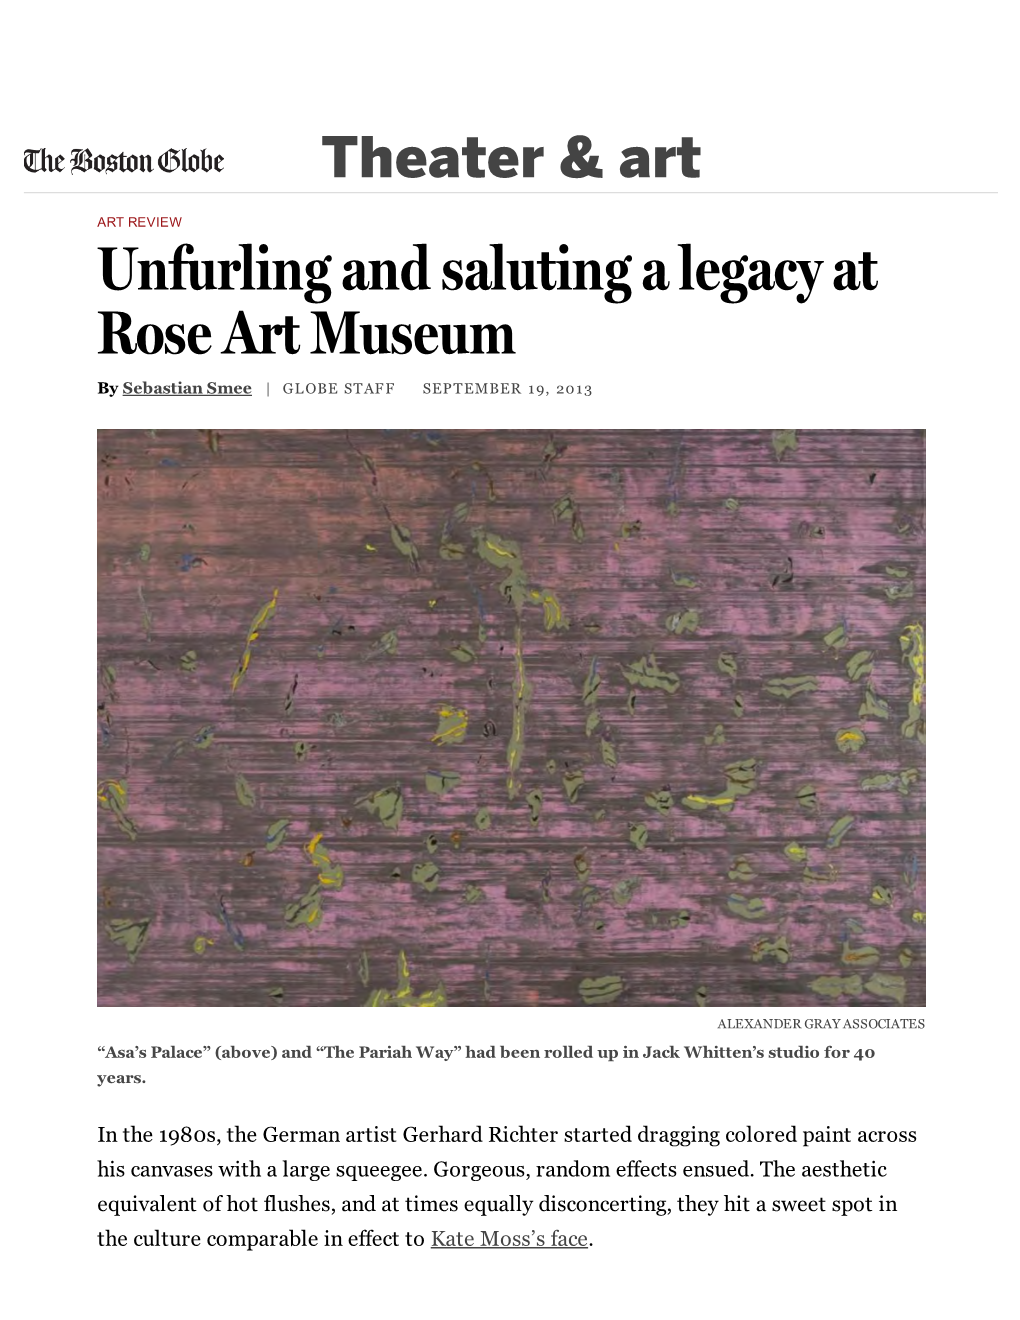 Unfurling and Saluting a Legacy at Rose Art Museum